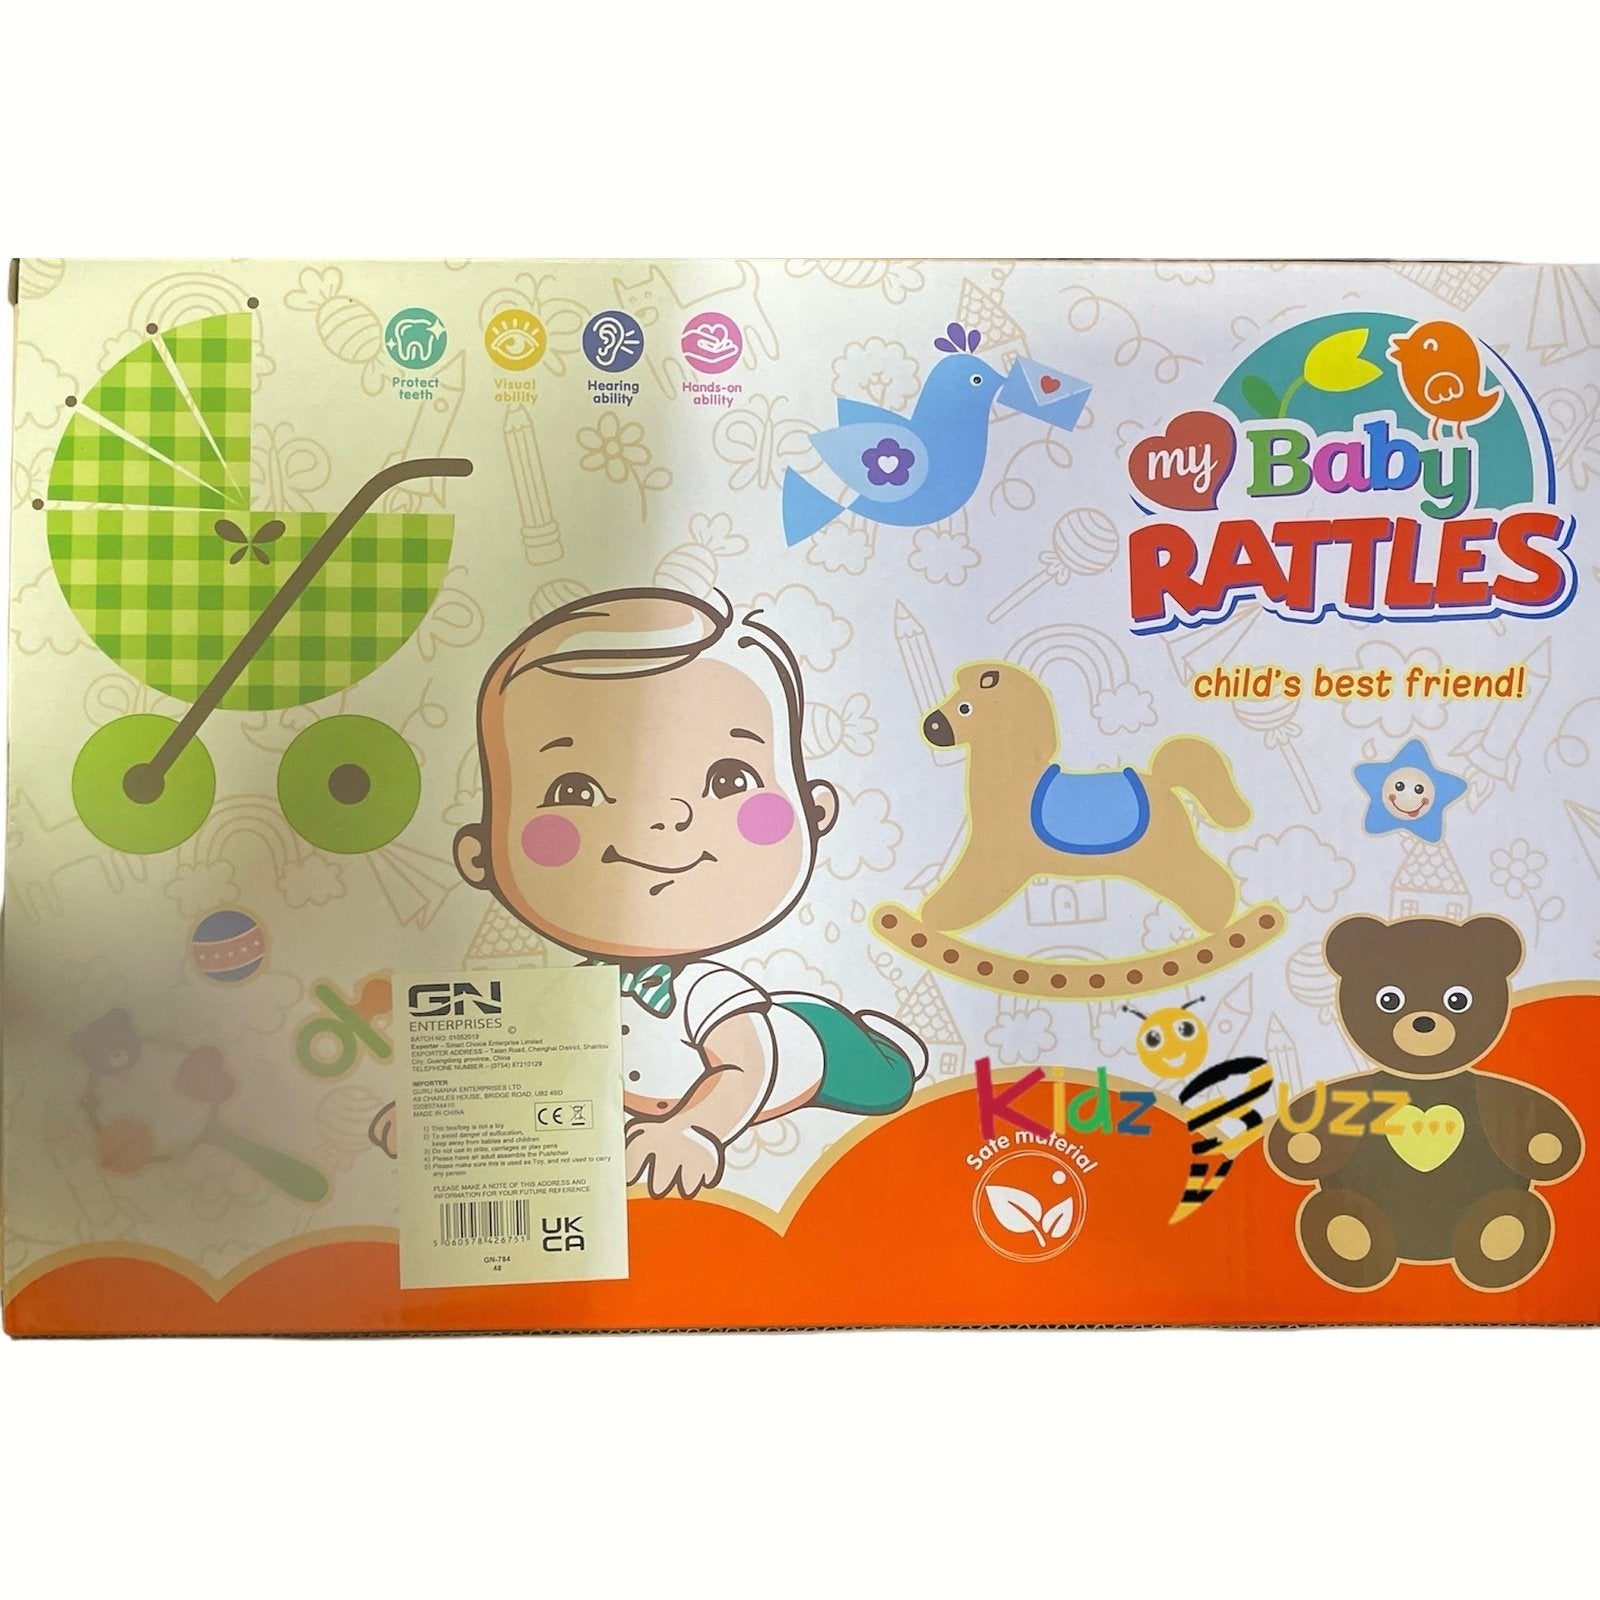 My Baby Rattles Teething Toys Rattle Socks Toys Baby Rattles for 0-6 Months